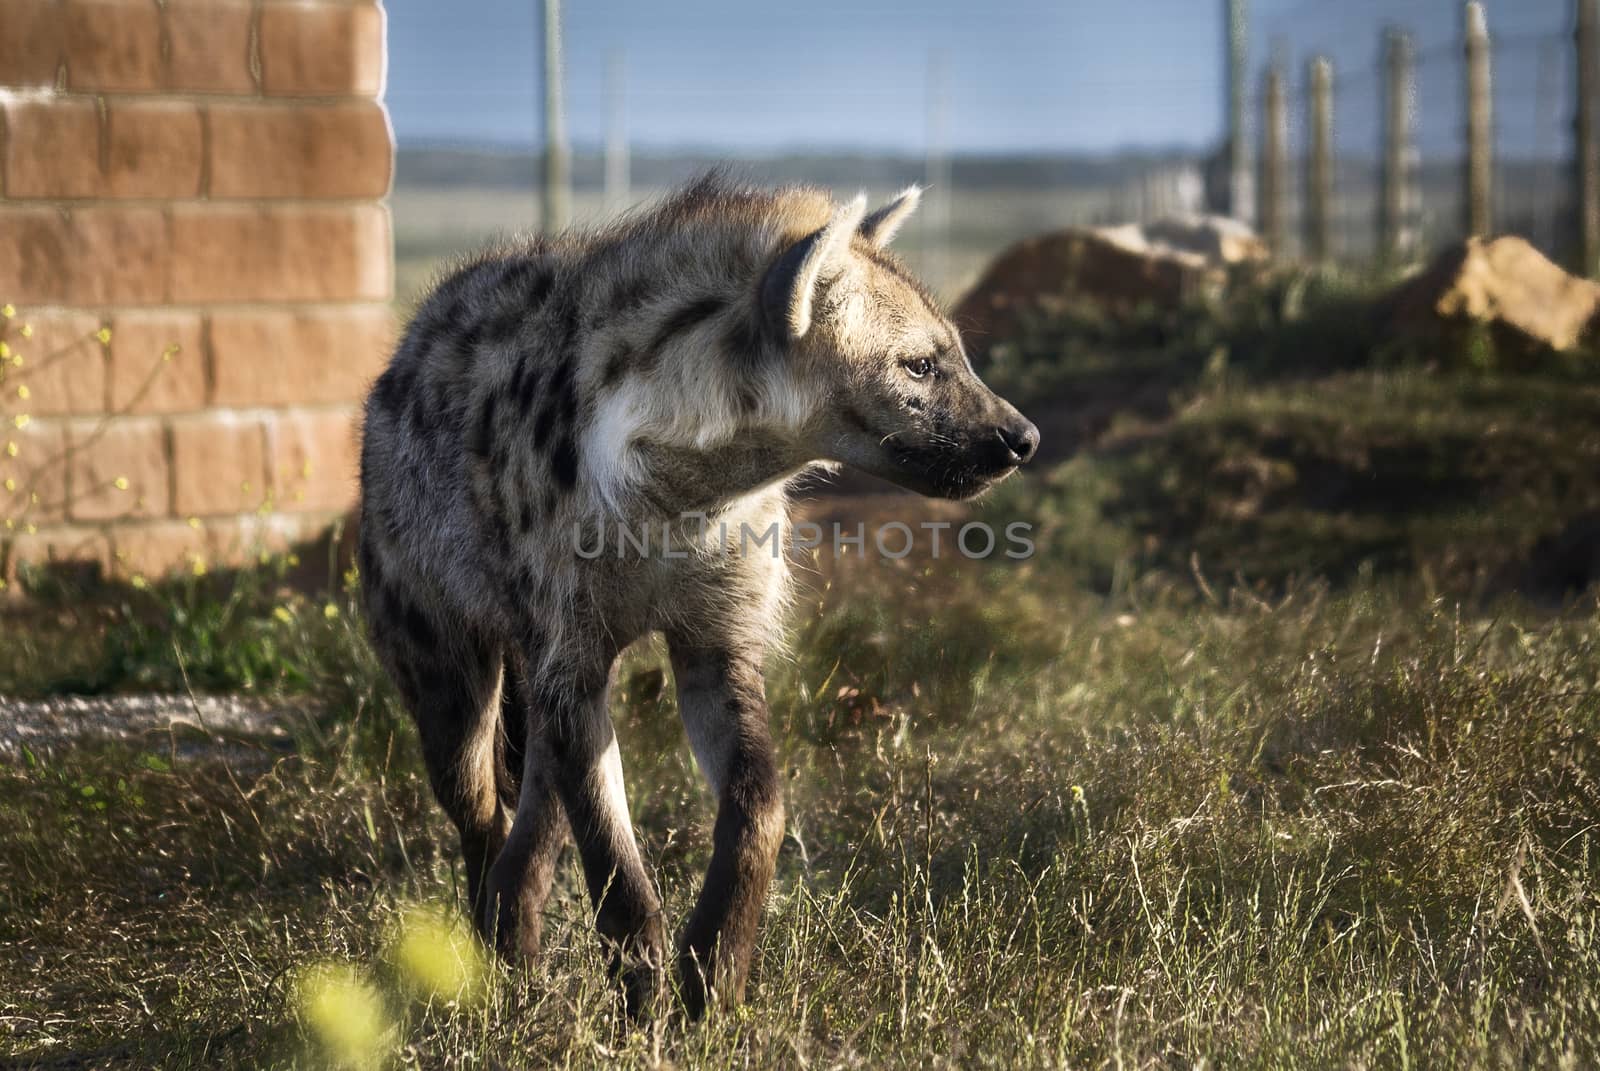 African painted wild dog (Lycaon pictus) by Anna07